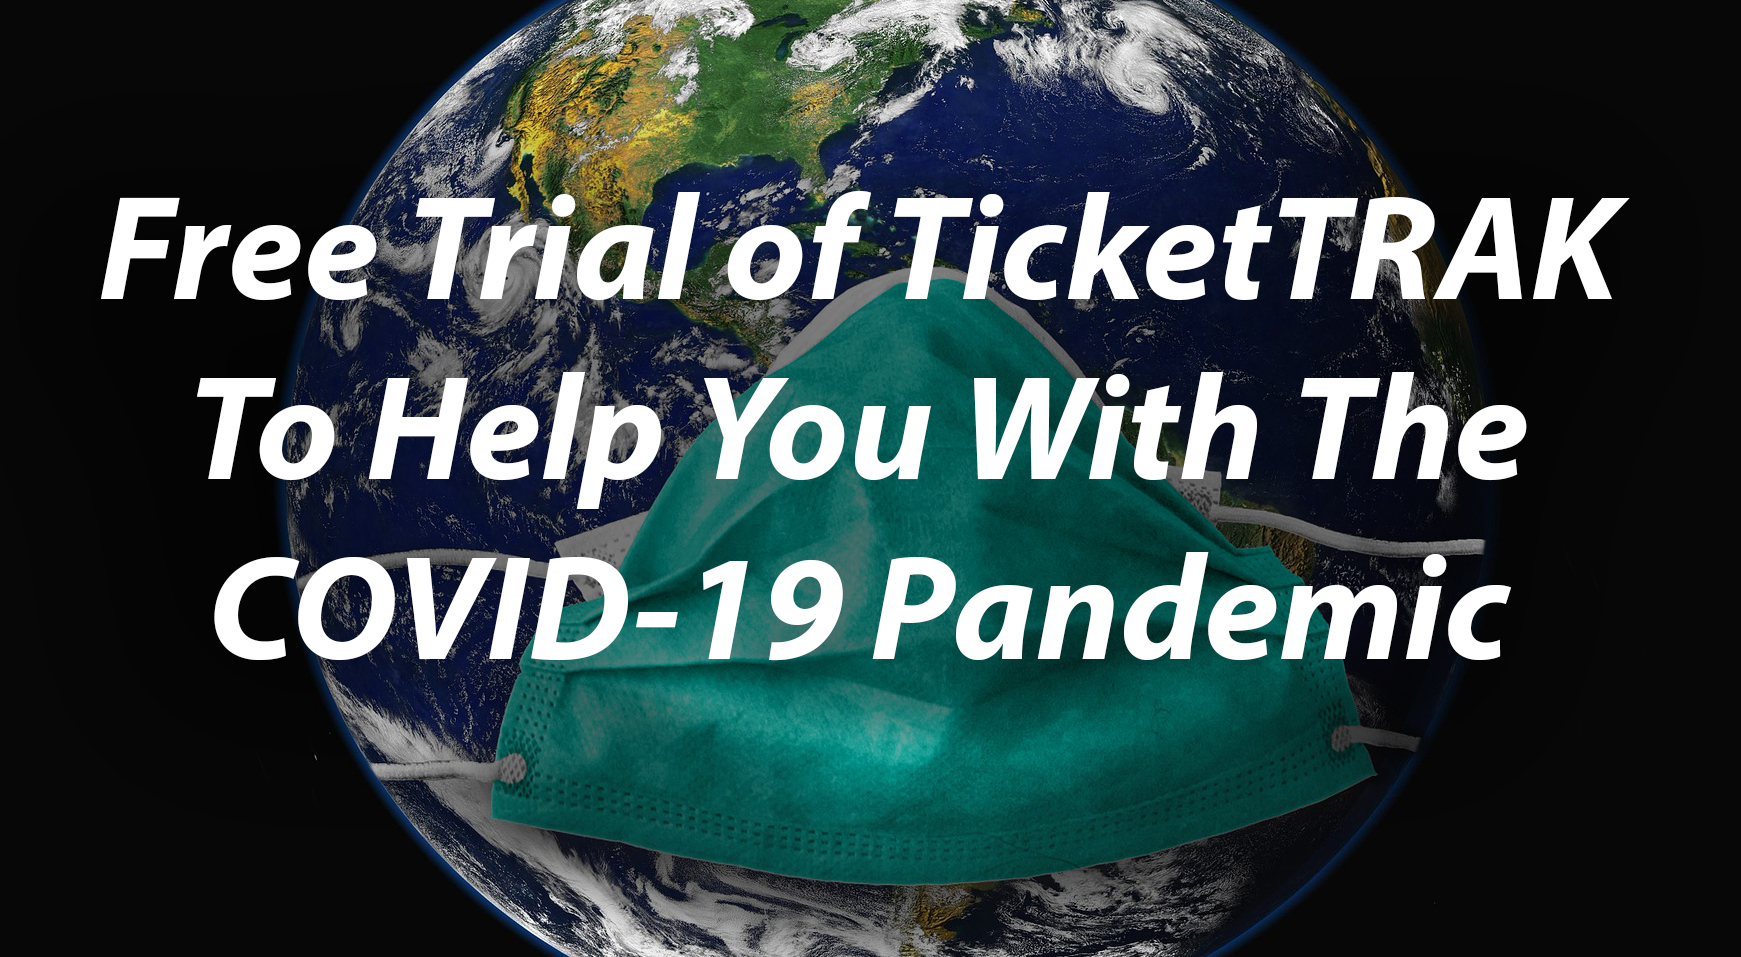 TicketTRAK Free Trial To Help You With The COVID-19 Pandemic